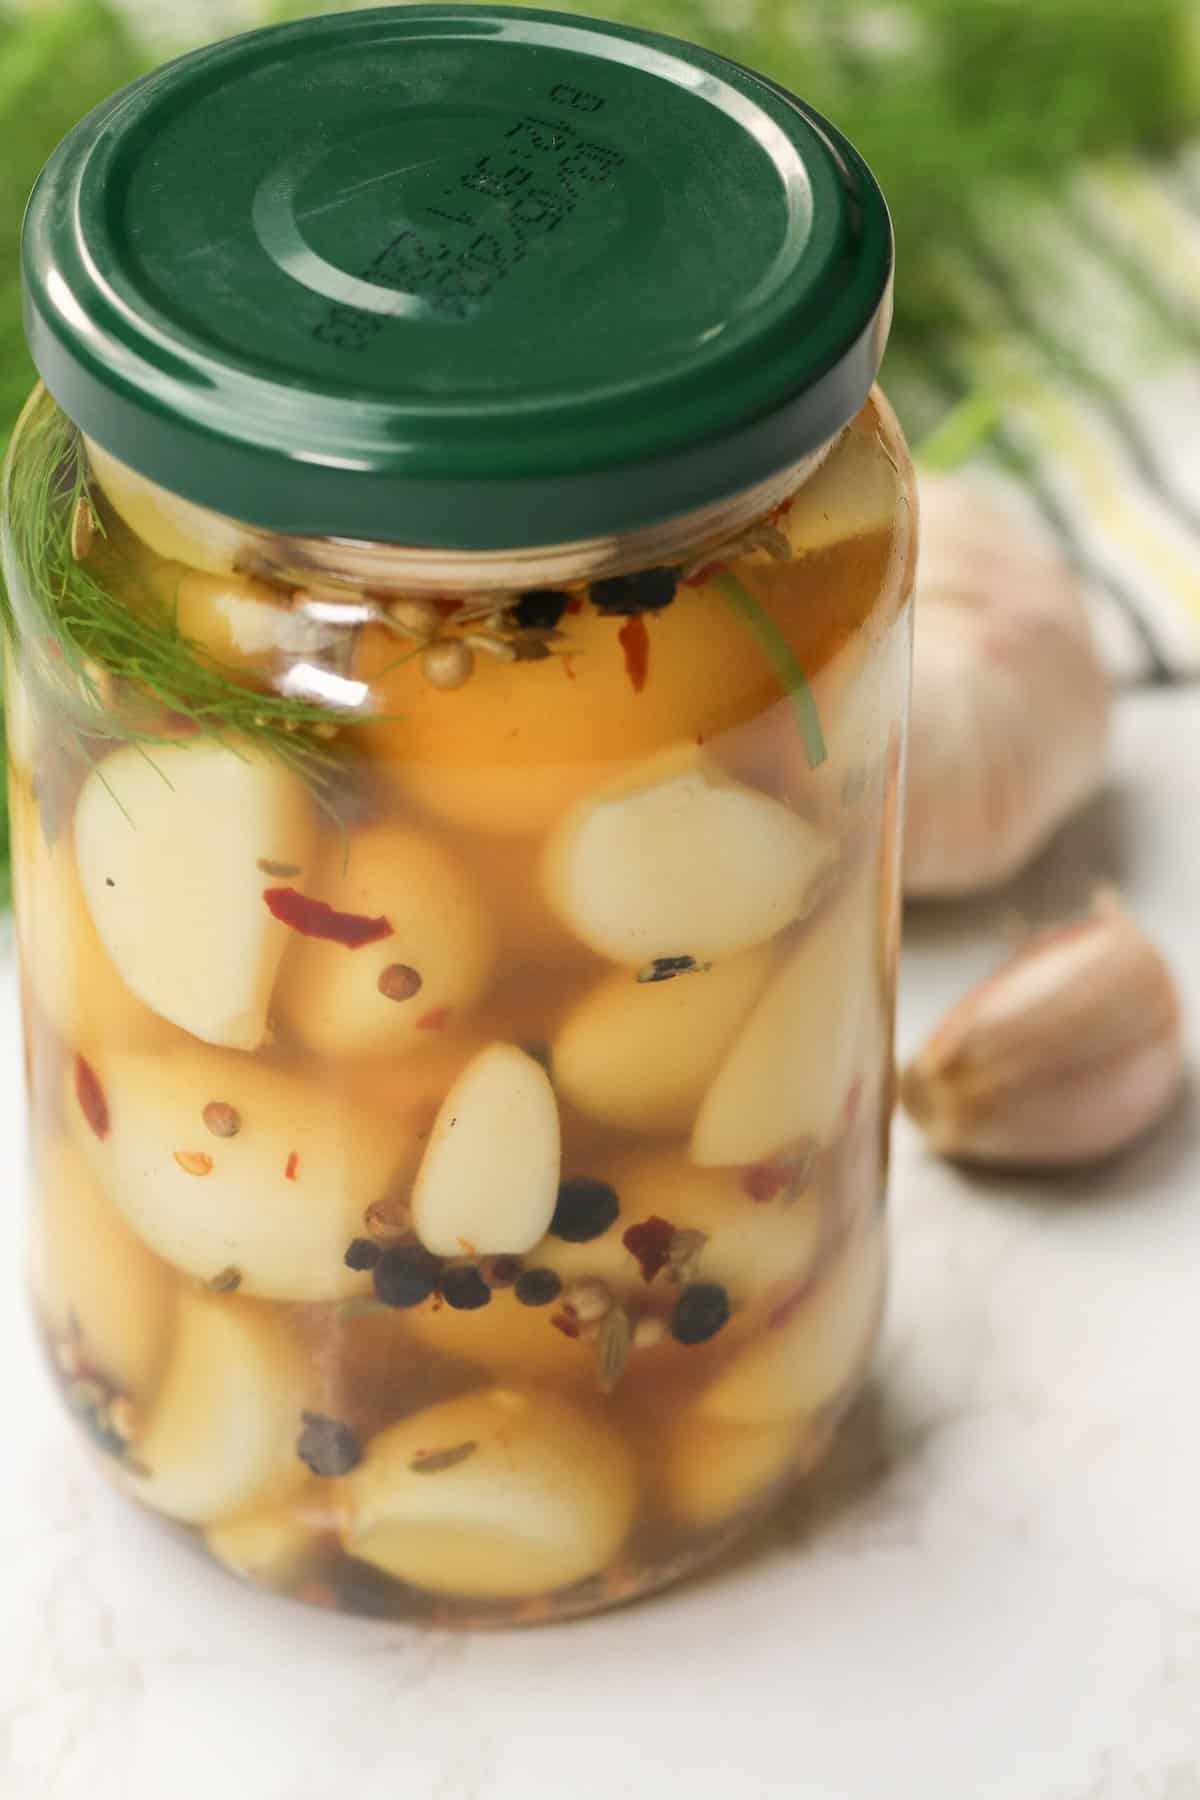 A jar of delicious pickled garlic for a healthy condiment